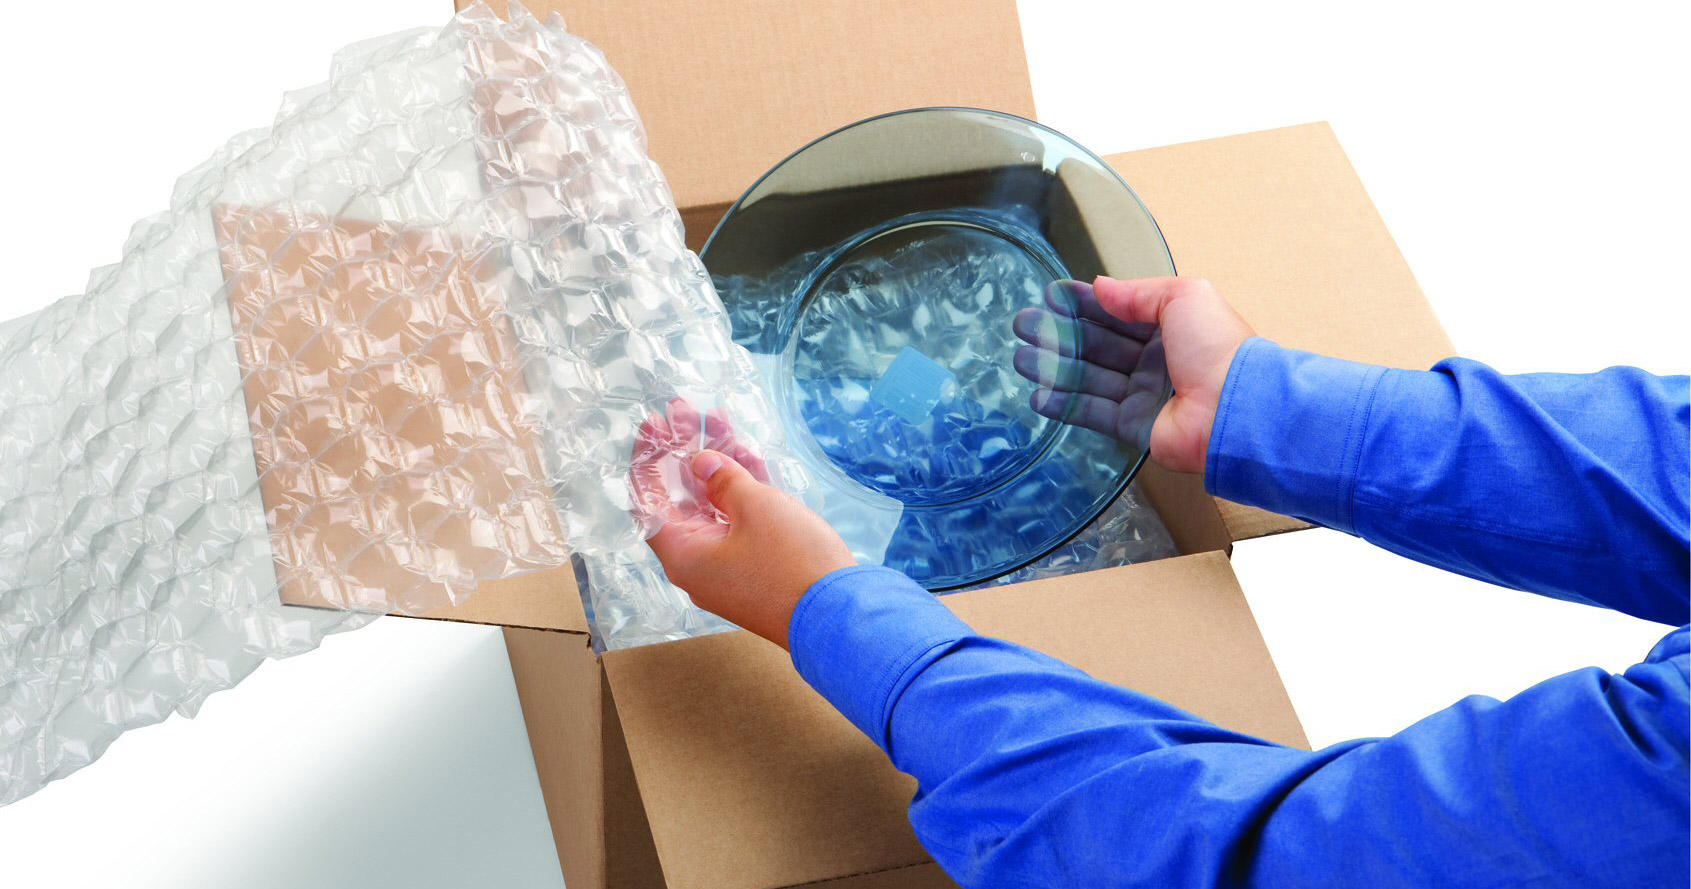 Proper use of bubble wrap when moving